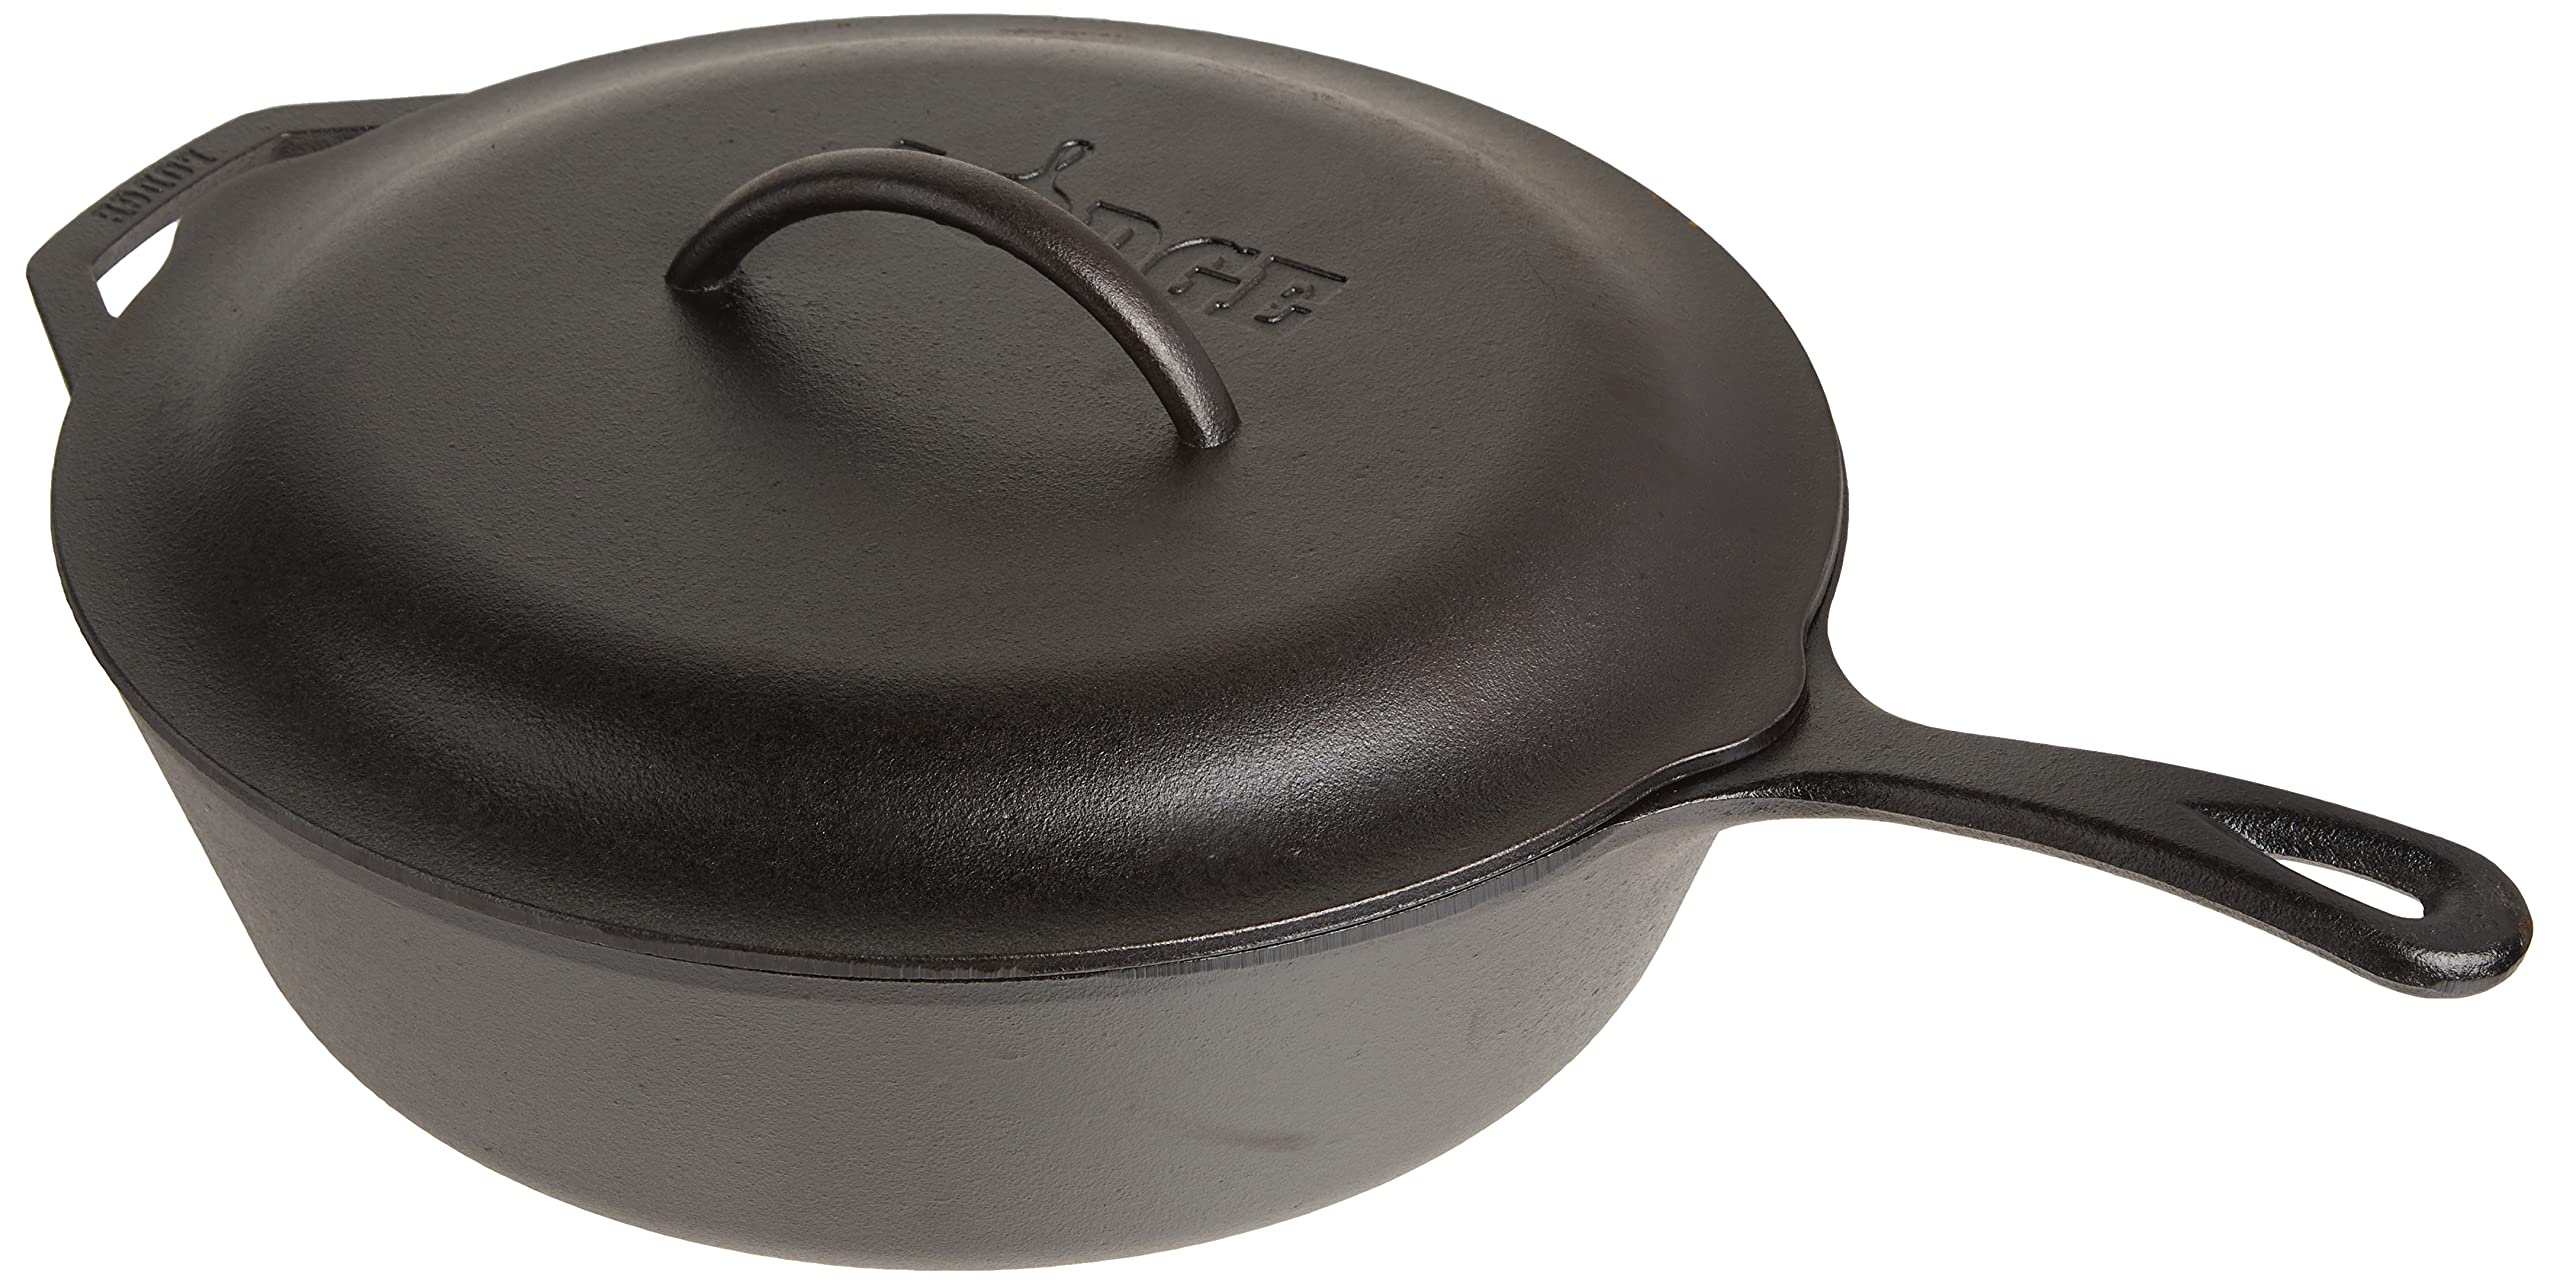 Lodge 5-Quart Pre-Seasoned Cast Iron Deep Skillet and Cover with Red Silicone Hot Handle Holder